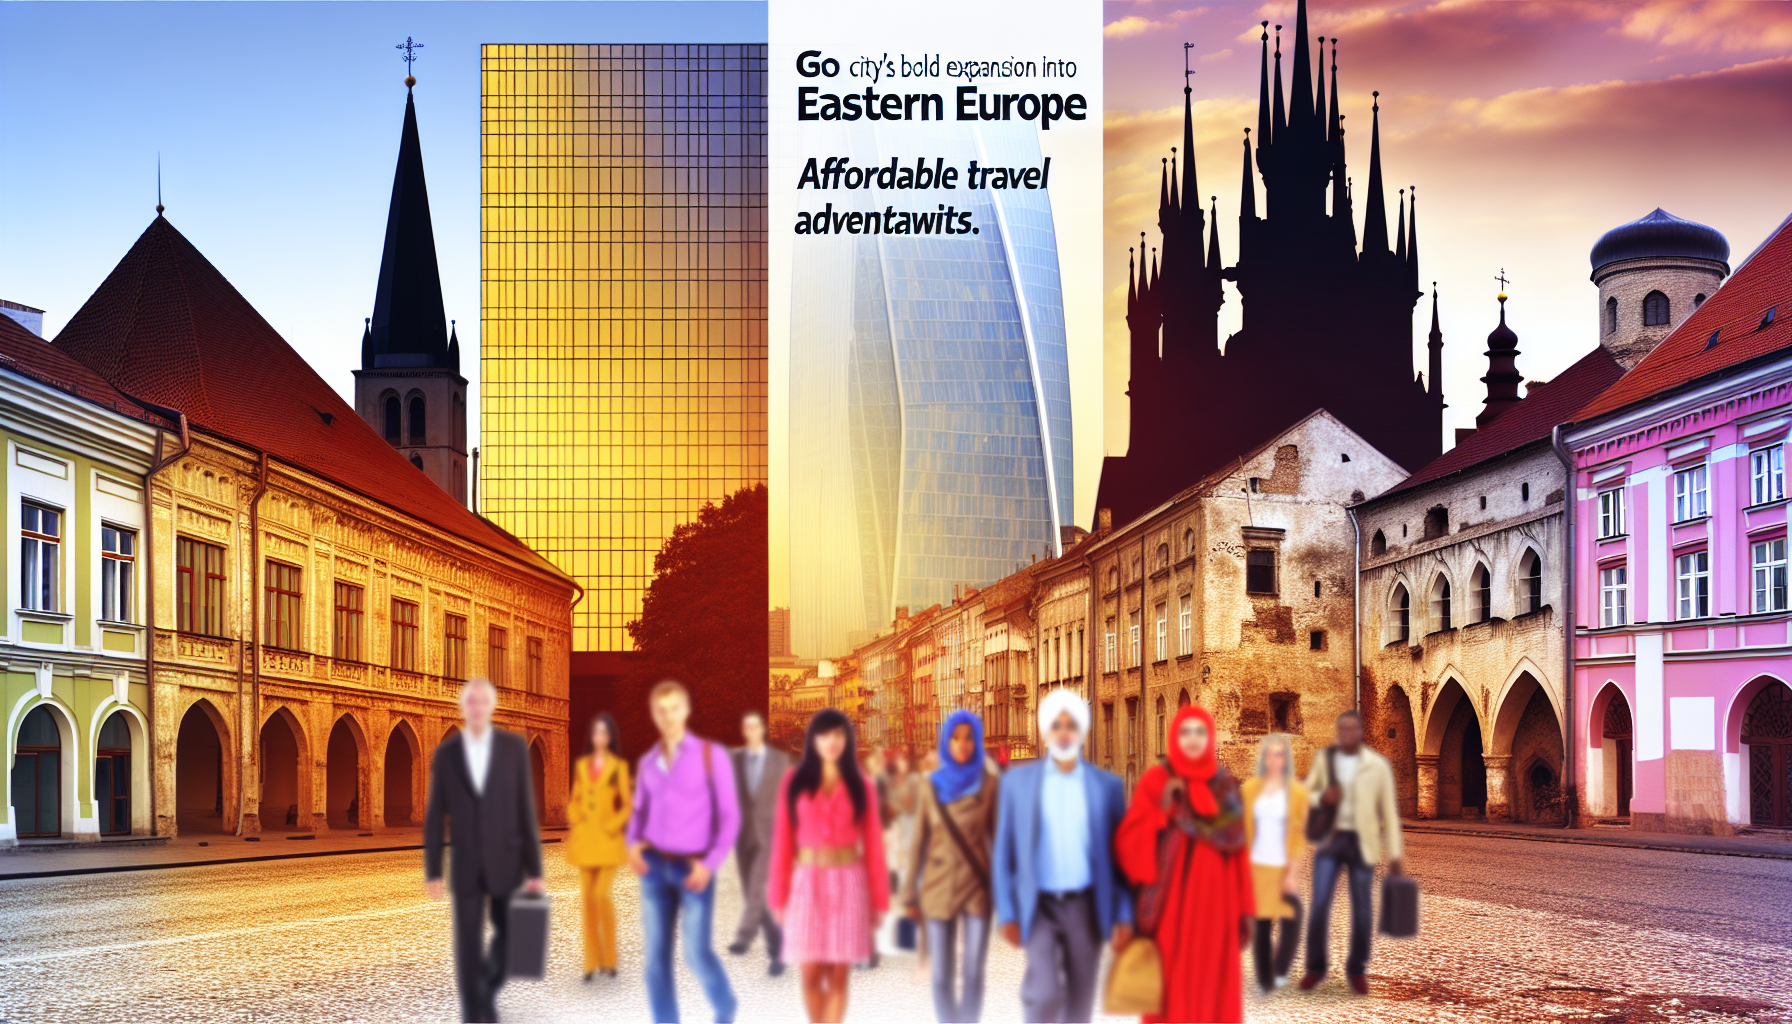 Go city's bold expansion into eastern Europe: affordable travel adventure awaits